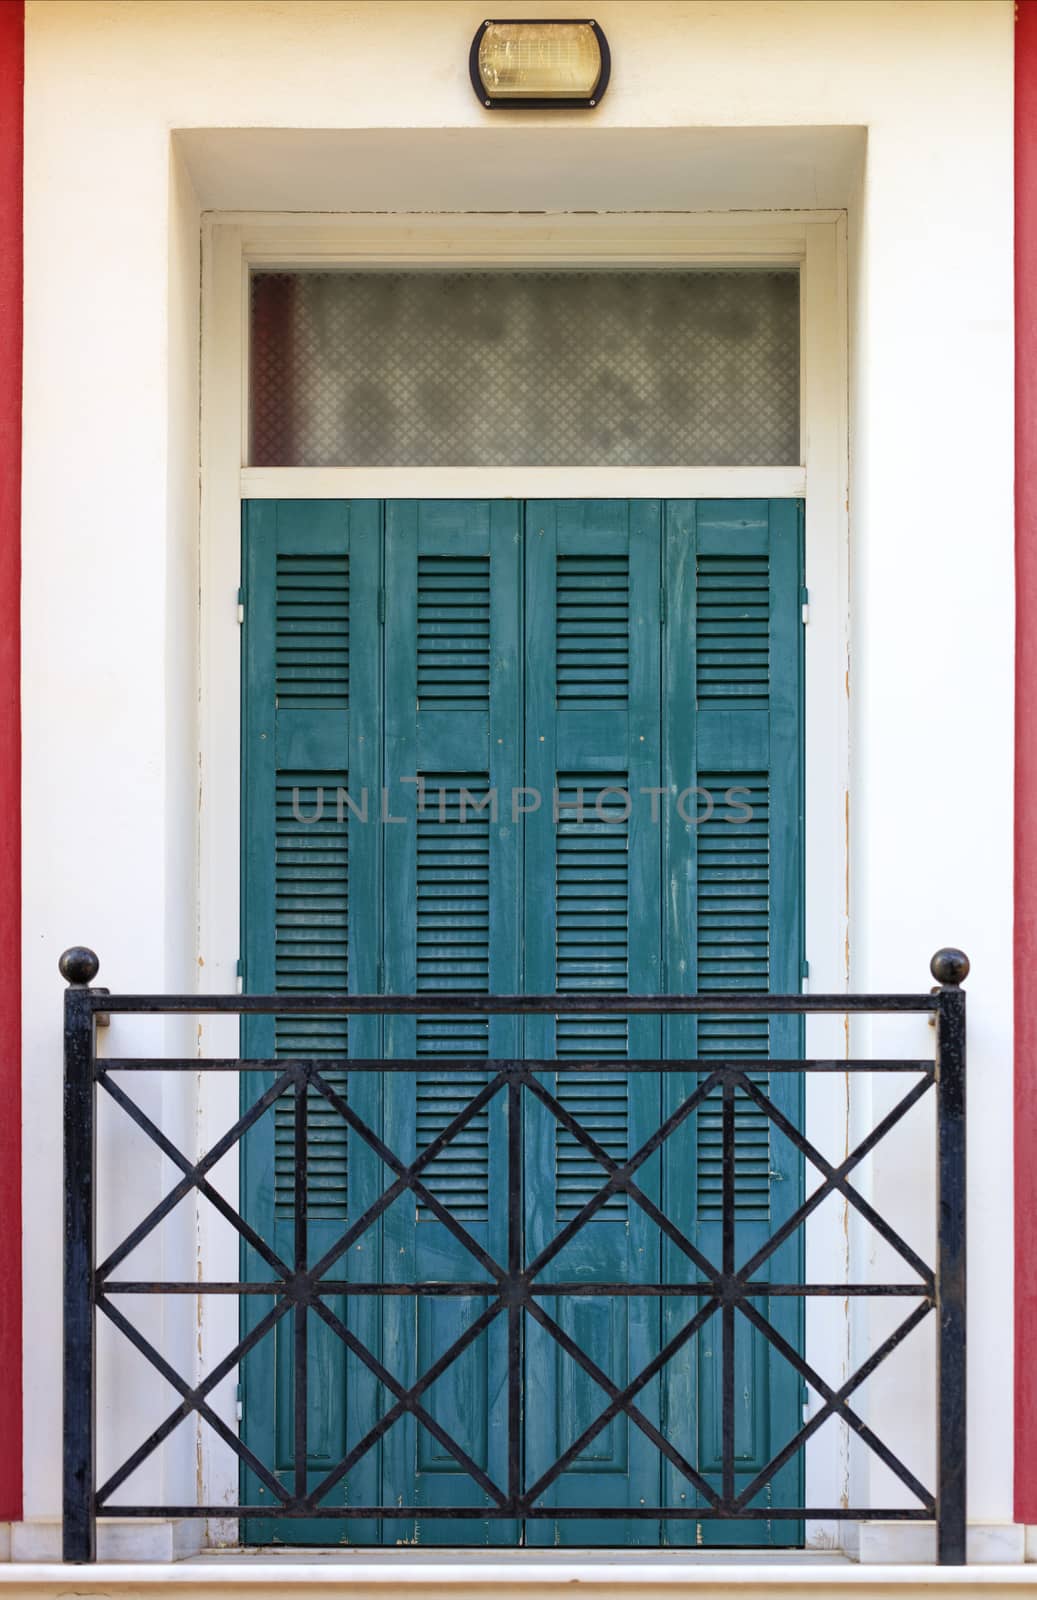 Old green wooden balcony doors with wooden shutters and metal bars in the Greek style balcony. by Sergii